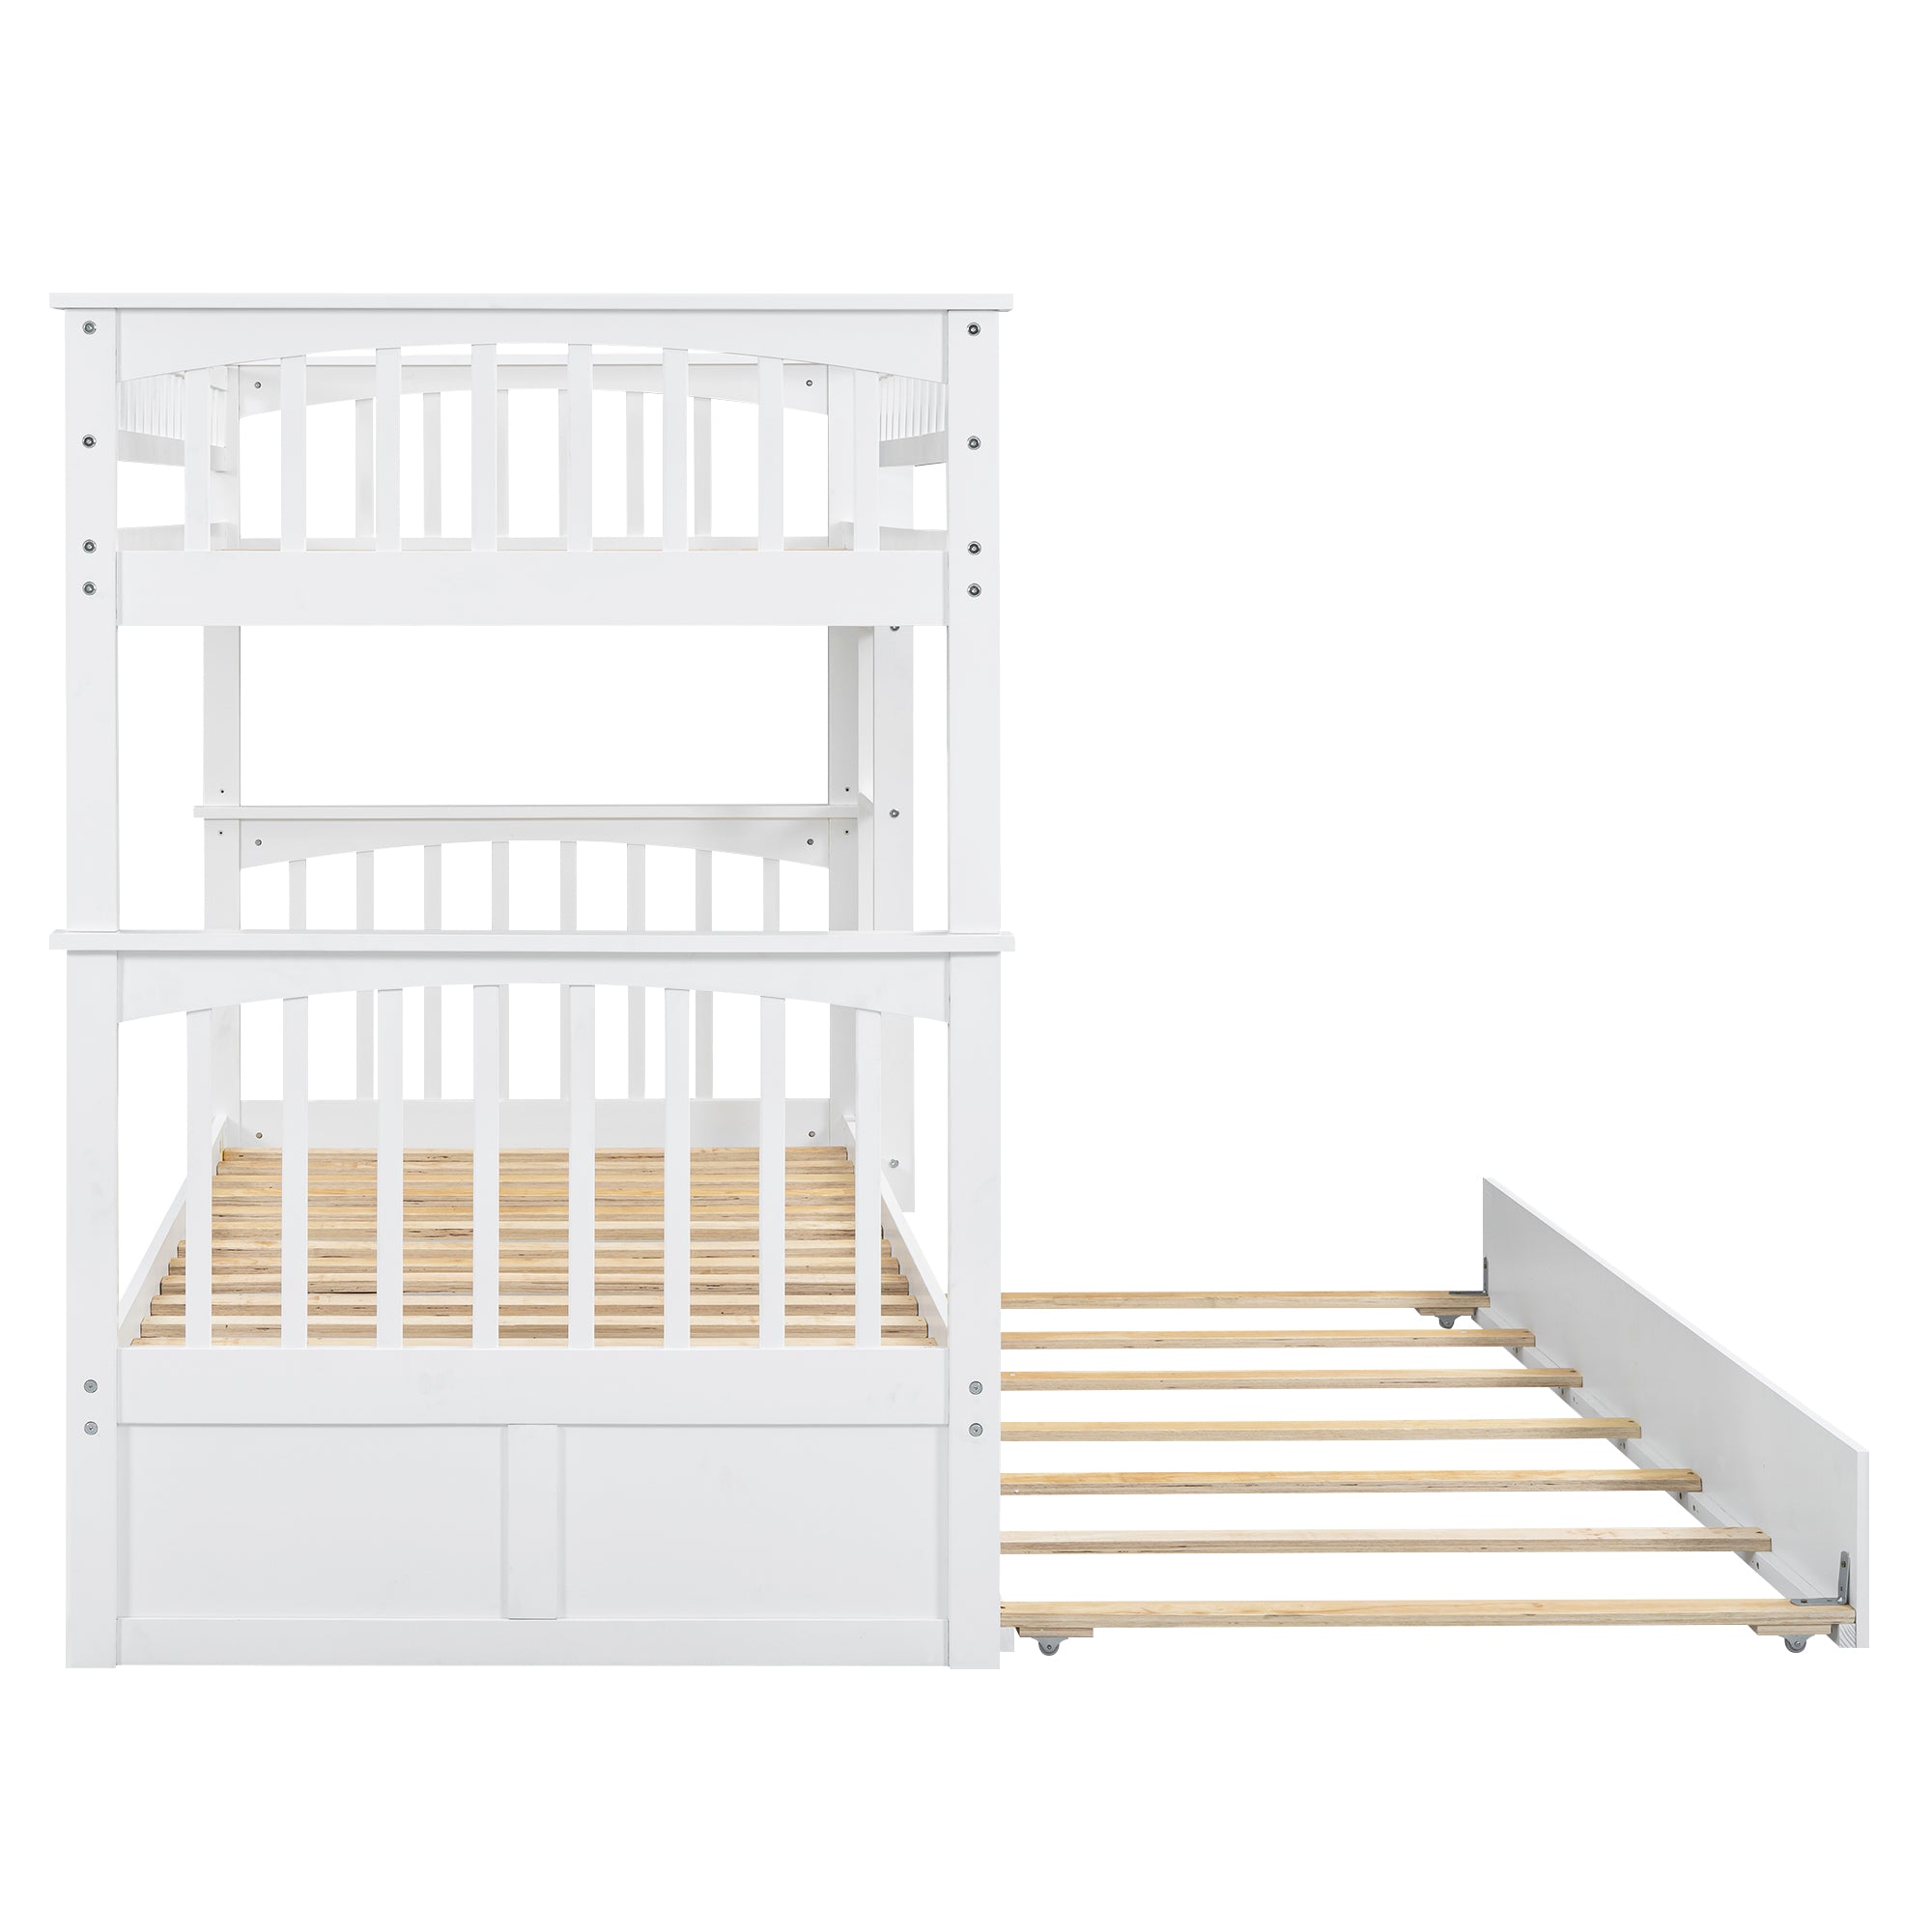 Bellemave Convertible Bunk Bed with Twin Size Trundle Bellemave